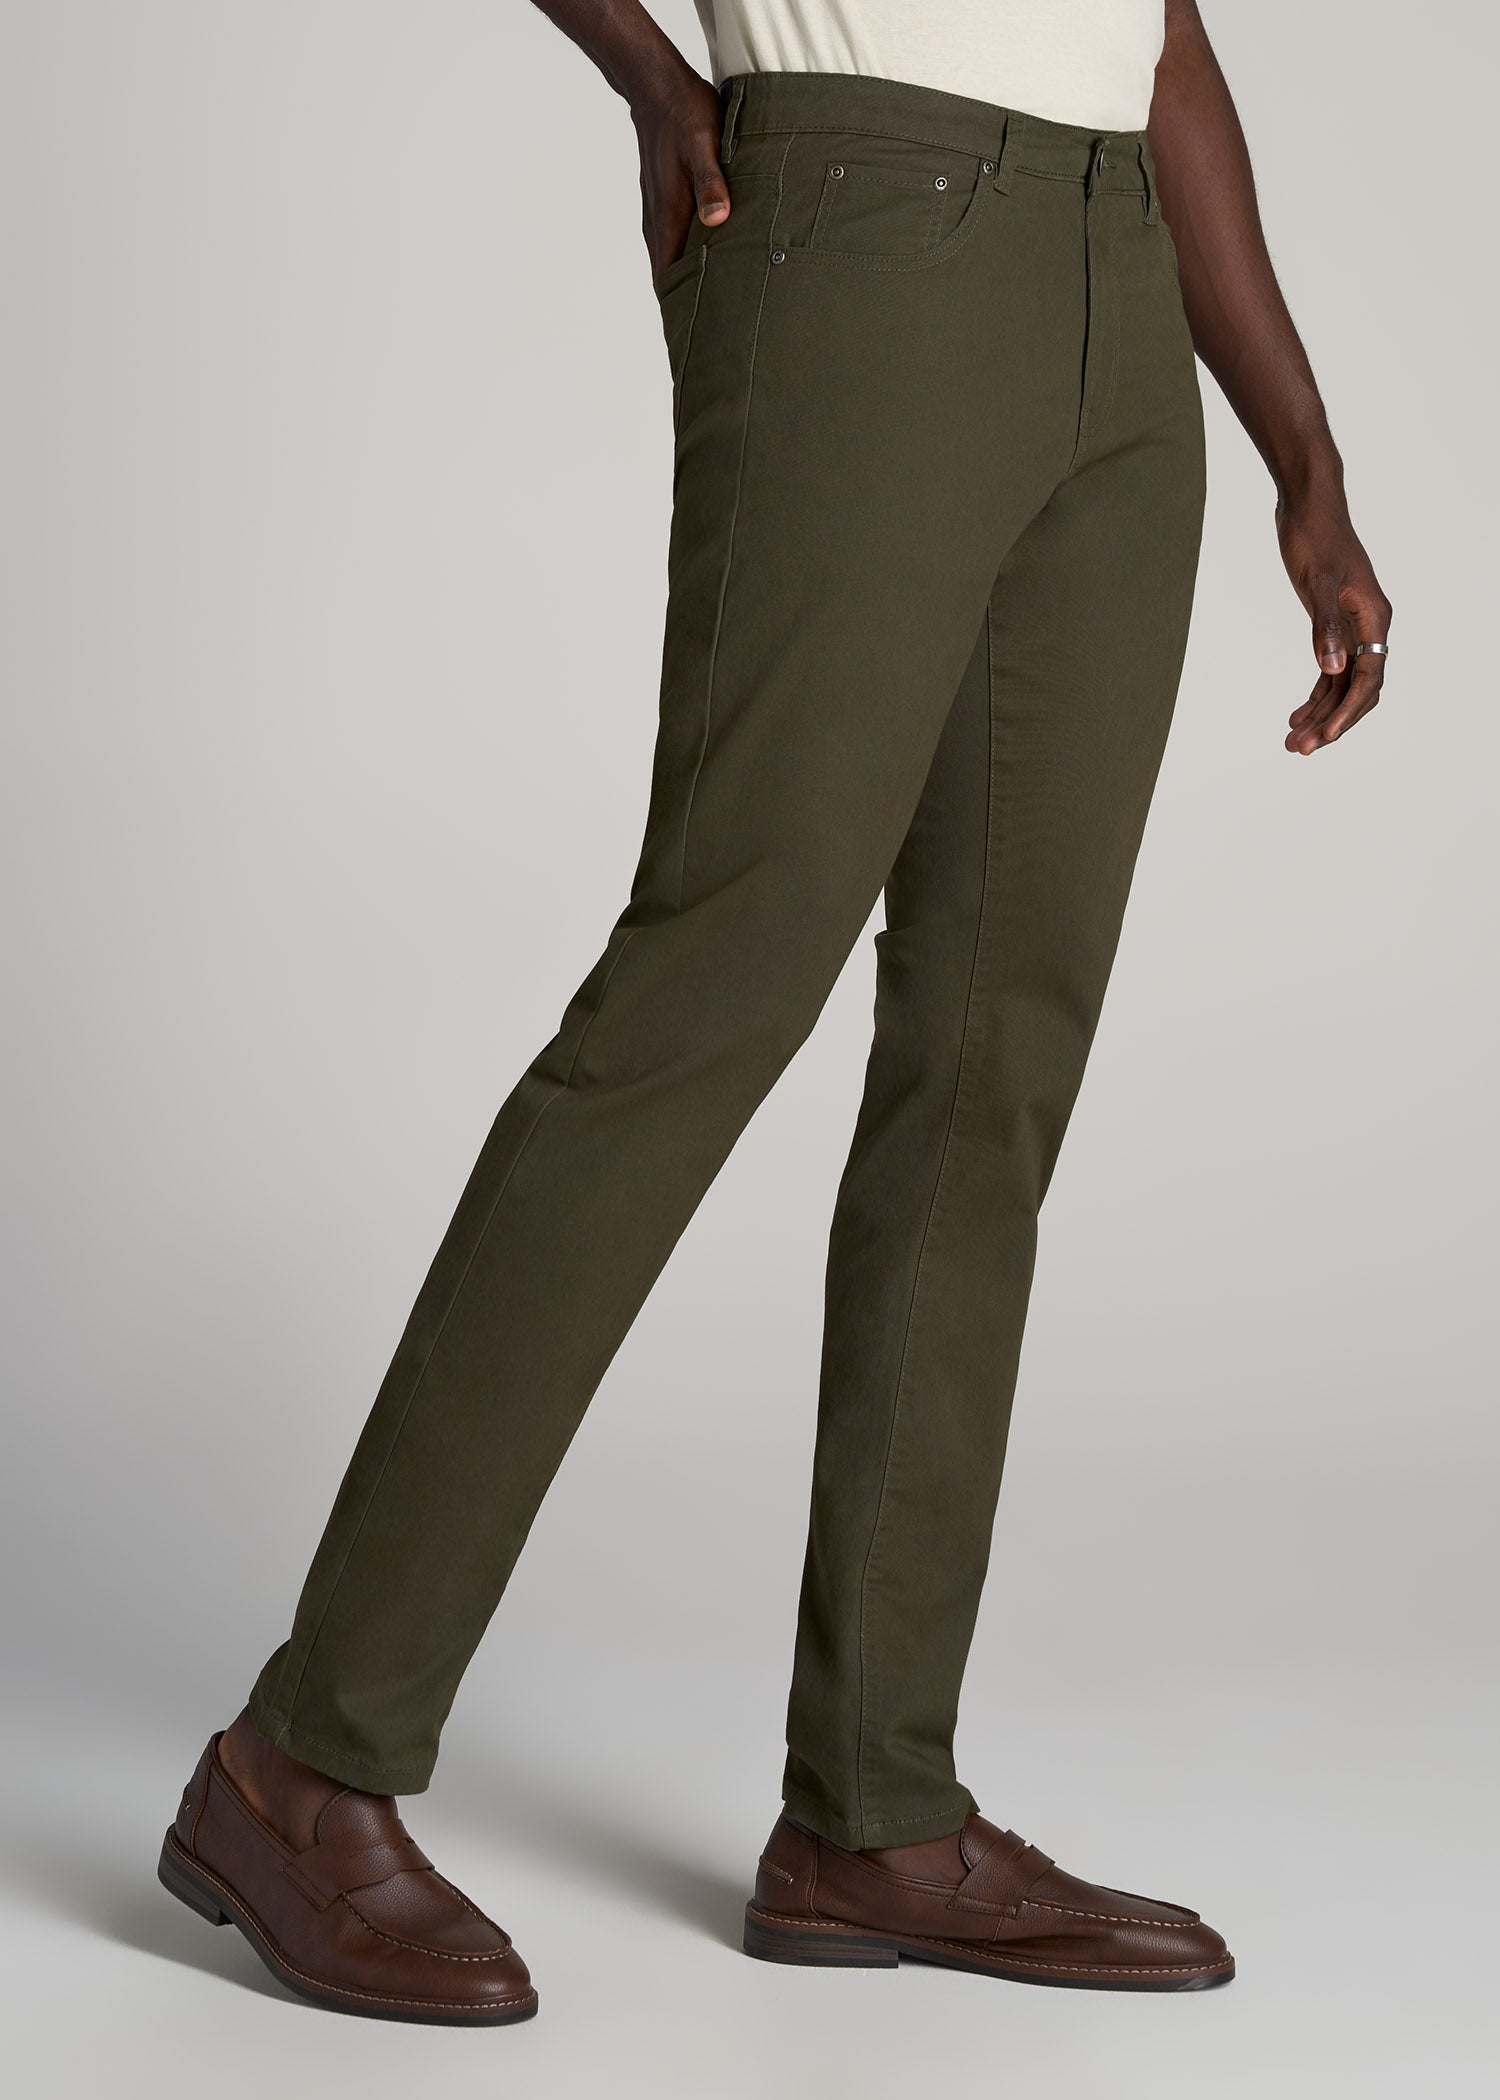 Italian Camouflage Trousers with Leg Pocket by RUM